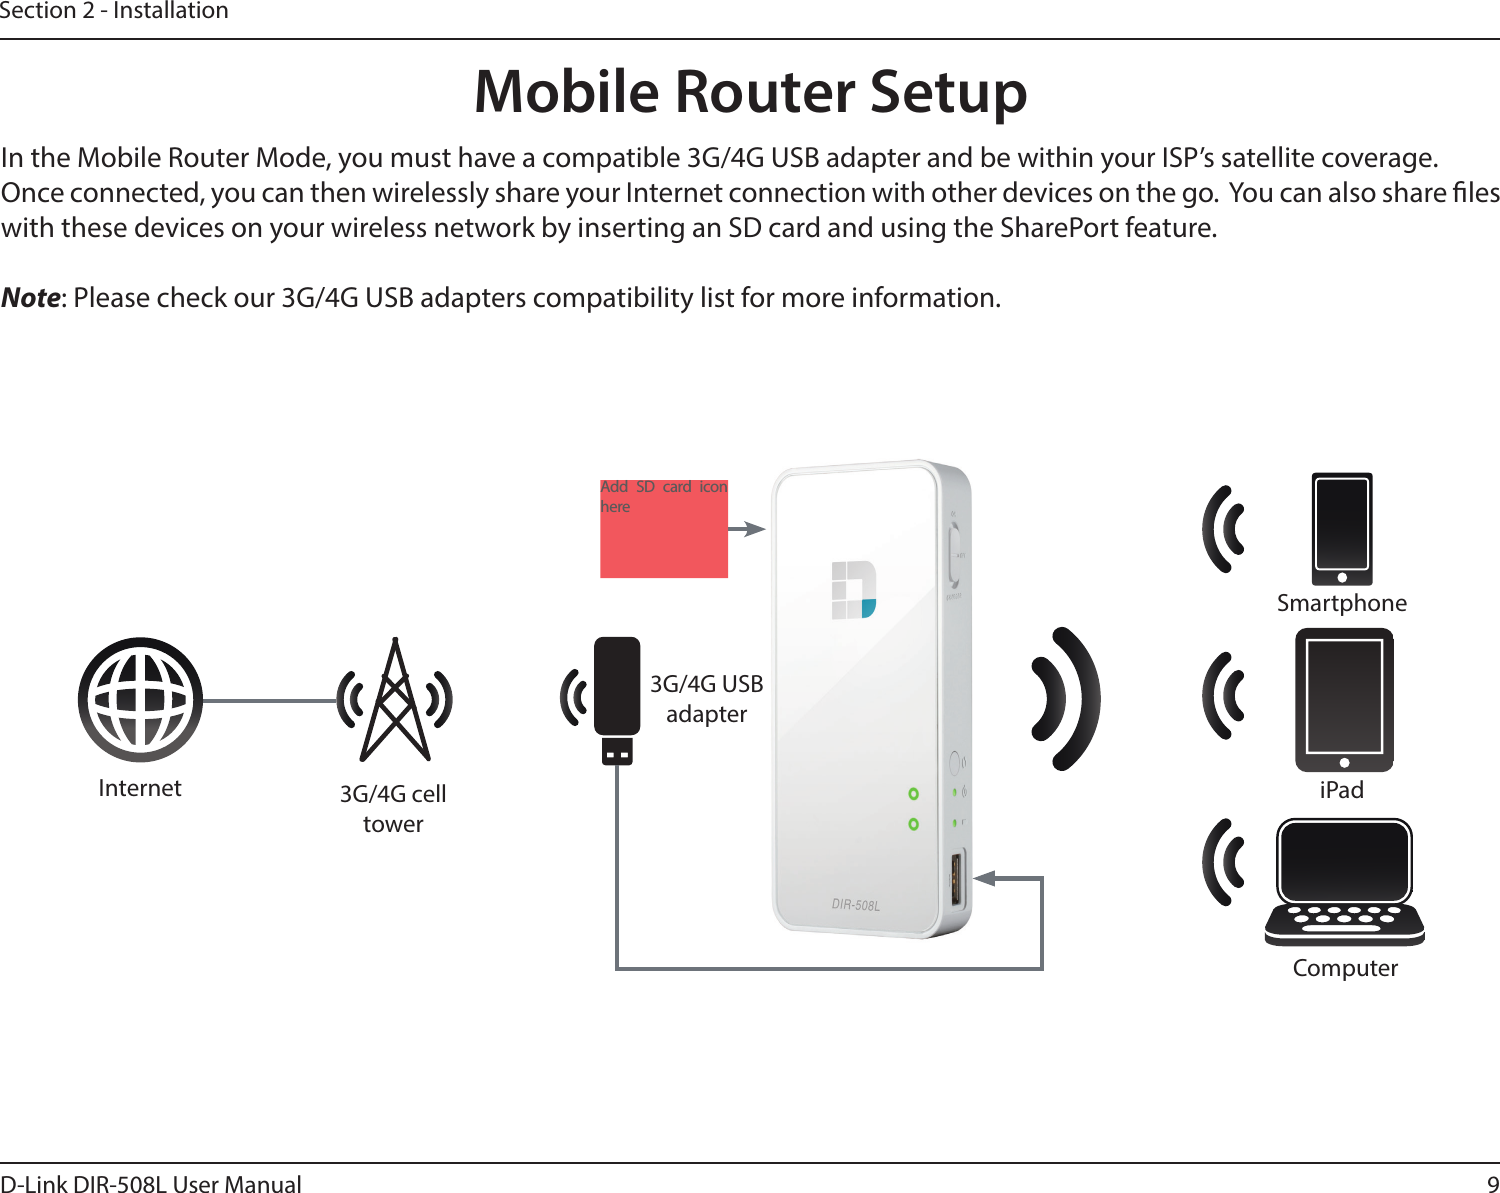 9D-Link DIR-508L User ManualSection 2 - InstallationMobile Router SetupIn the Mobile Router Mode, you must have a compatible 3G/4G USB adapter and be within your ISP’s satellite coverage.Once connected, you can then wirelessly share your Internet connection with other devices on the go.  You can also share les with these devices on your wireless network by inserting an SD card and using the SharePort feature. Note: Please check our 3G/4G USB adapters compatibility list for more information.ComputeriPadSmartphoneInternet 3G/4G cell tower3G/4G USBadapterAdd SD card icon here